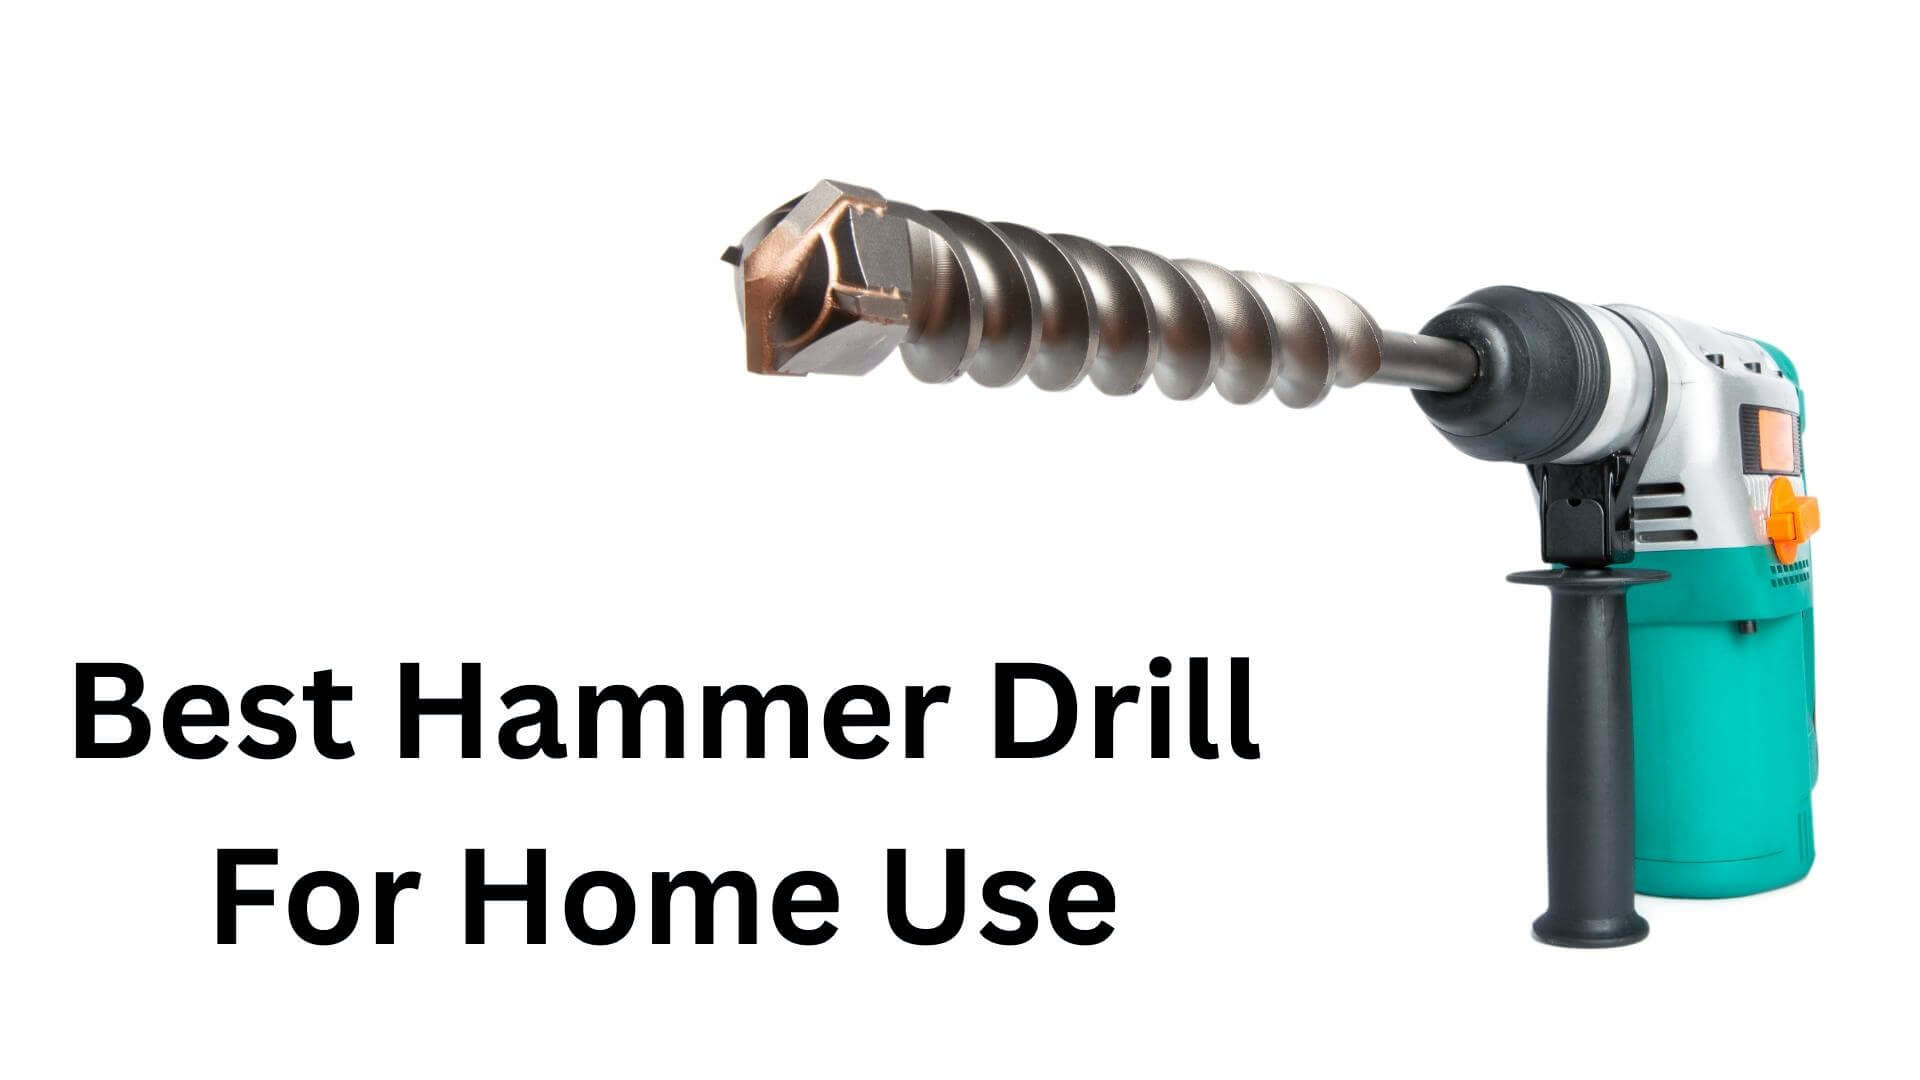 Best Hammer drill for home use